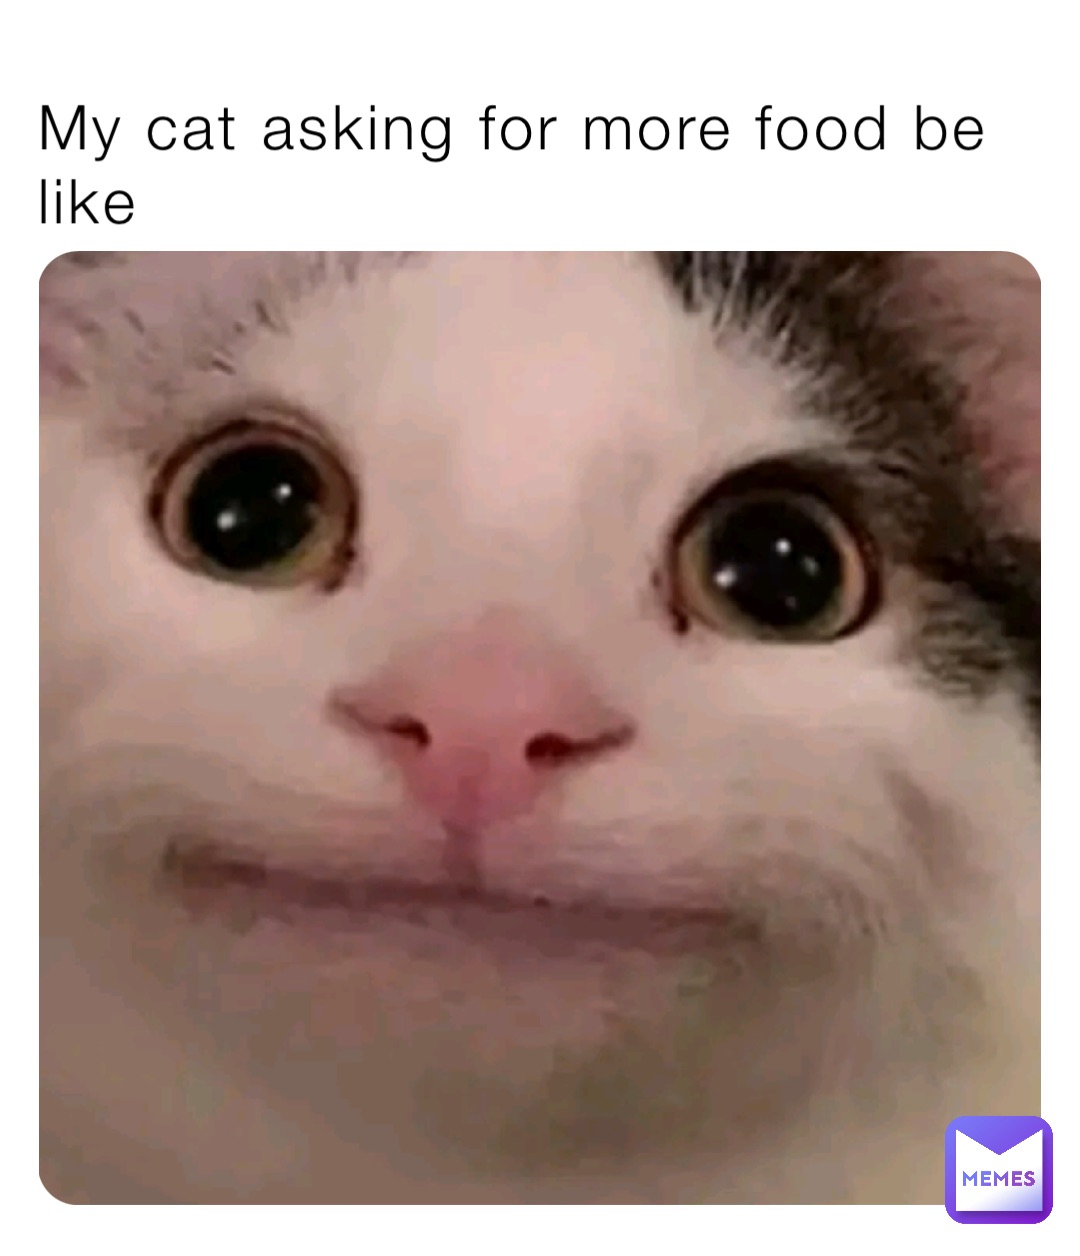 My cat asking for more food be like